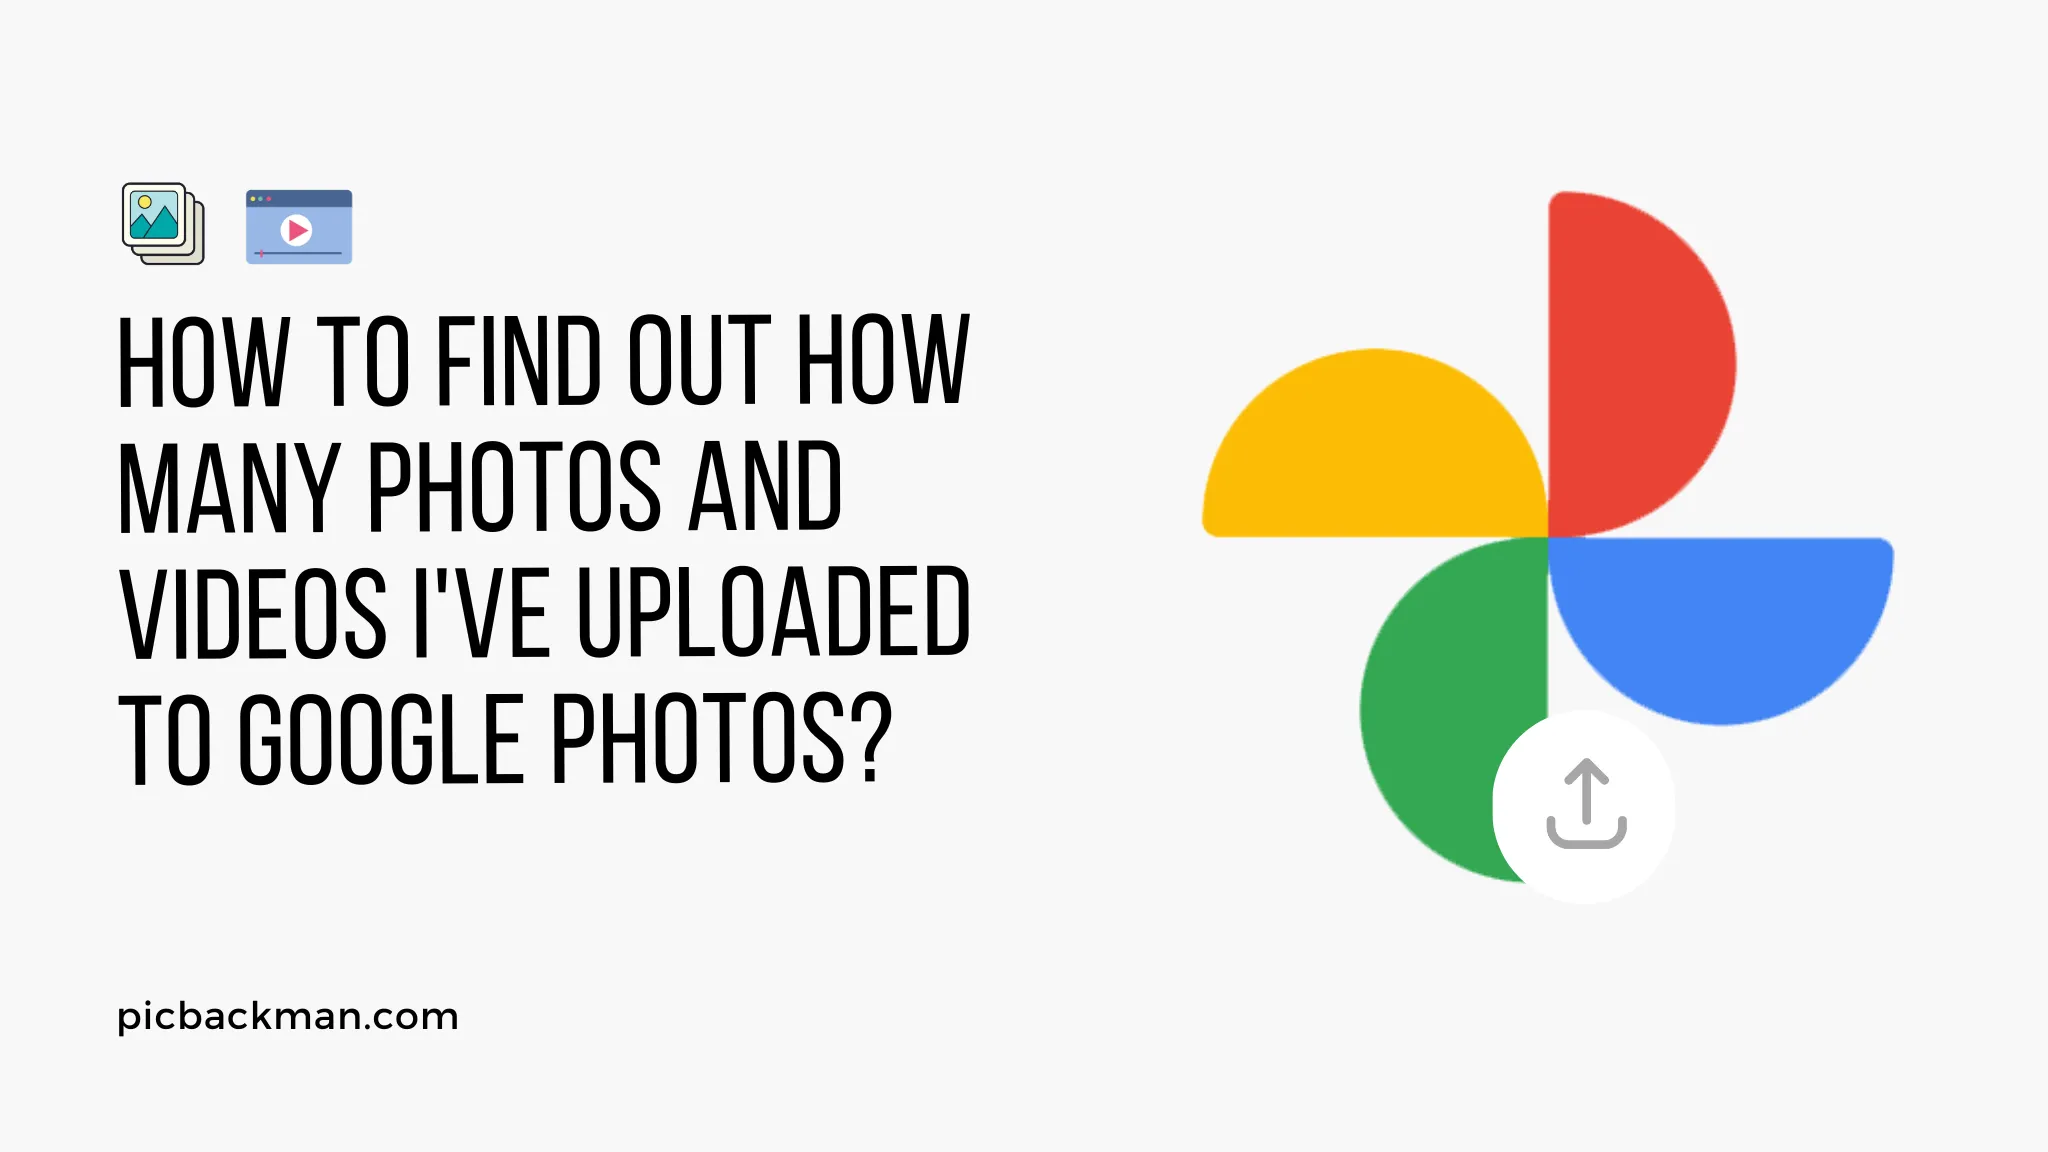 How to Find Out How Many Photos and Videos I've Uploaded to Google Photos